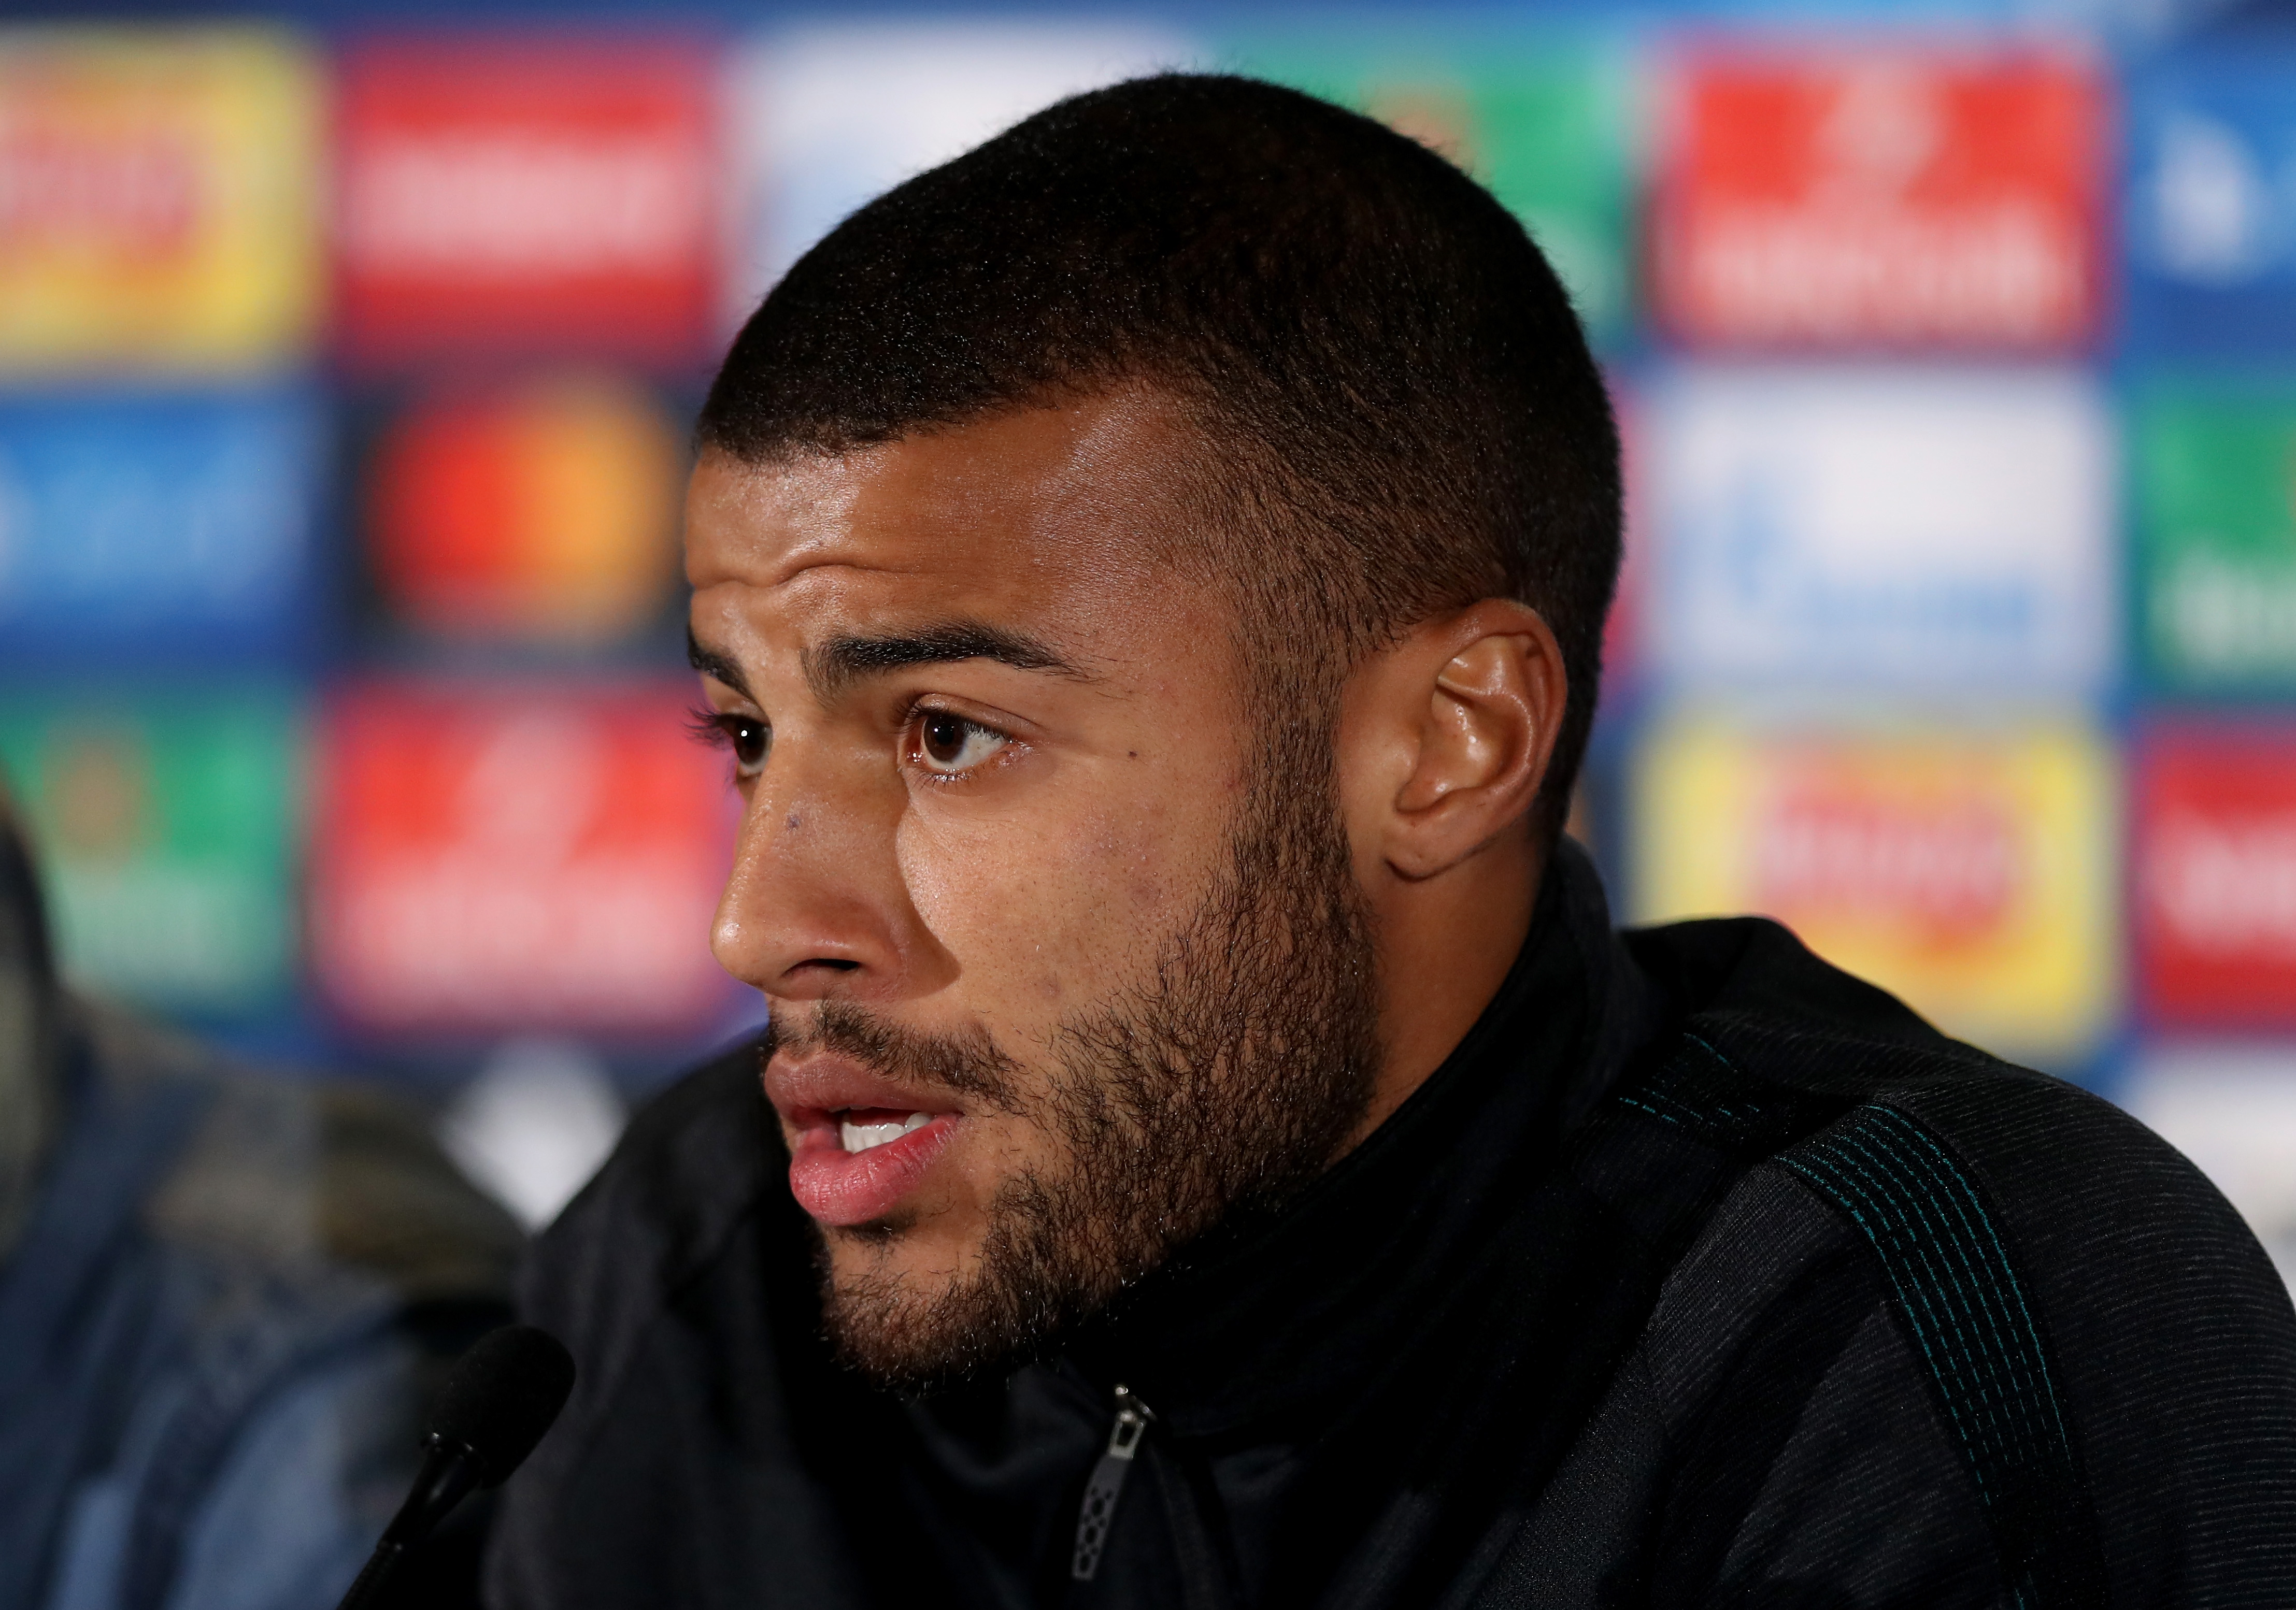 GLASGOW, SCOTLAND - NOVEMBER 22:  Rafinha of Barcelona speaks to the media during the FC Barcelona press conference at Celtic Park Stadium on November 22, 2016 in Glasgow, Scotland.  (Photo by Ian MacNicol/Getty Images)